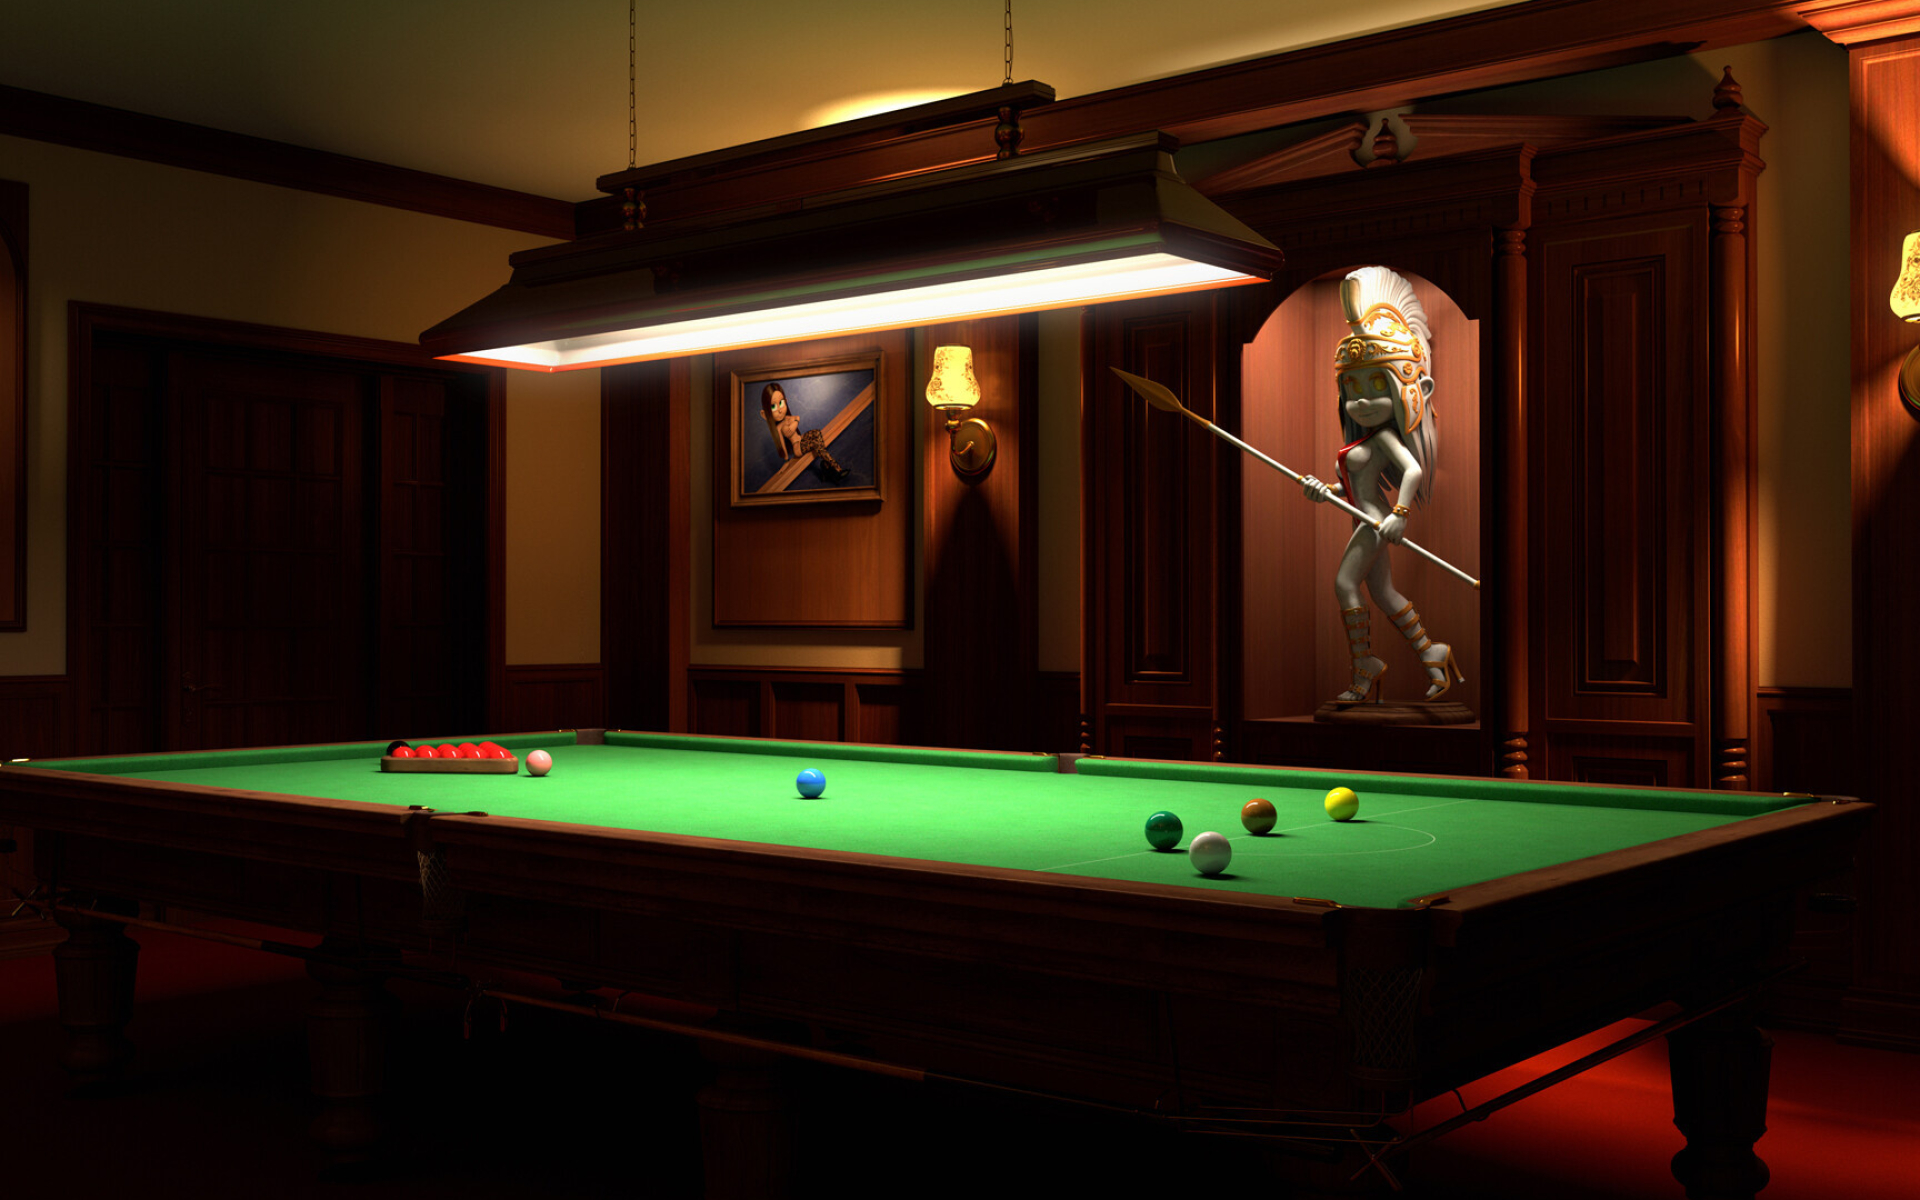 Snooker: Typical room for a cue game in the English pub, Recreational activity and sport. 1920x1200 HD Wallpaper.